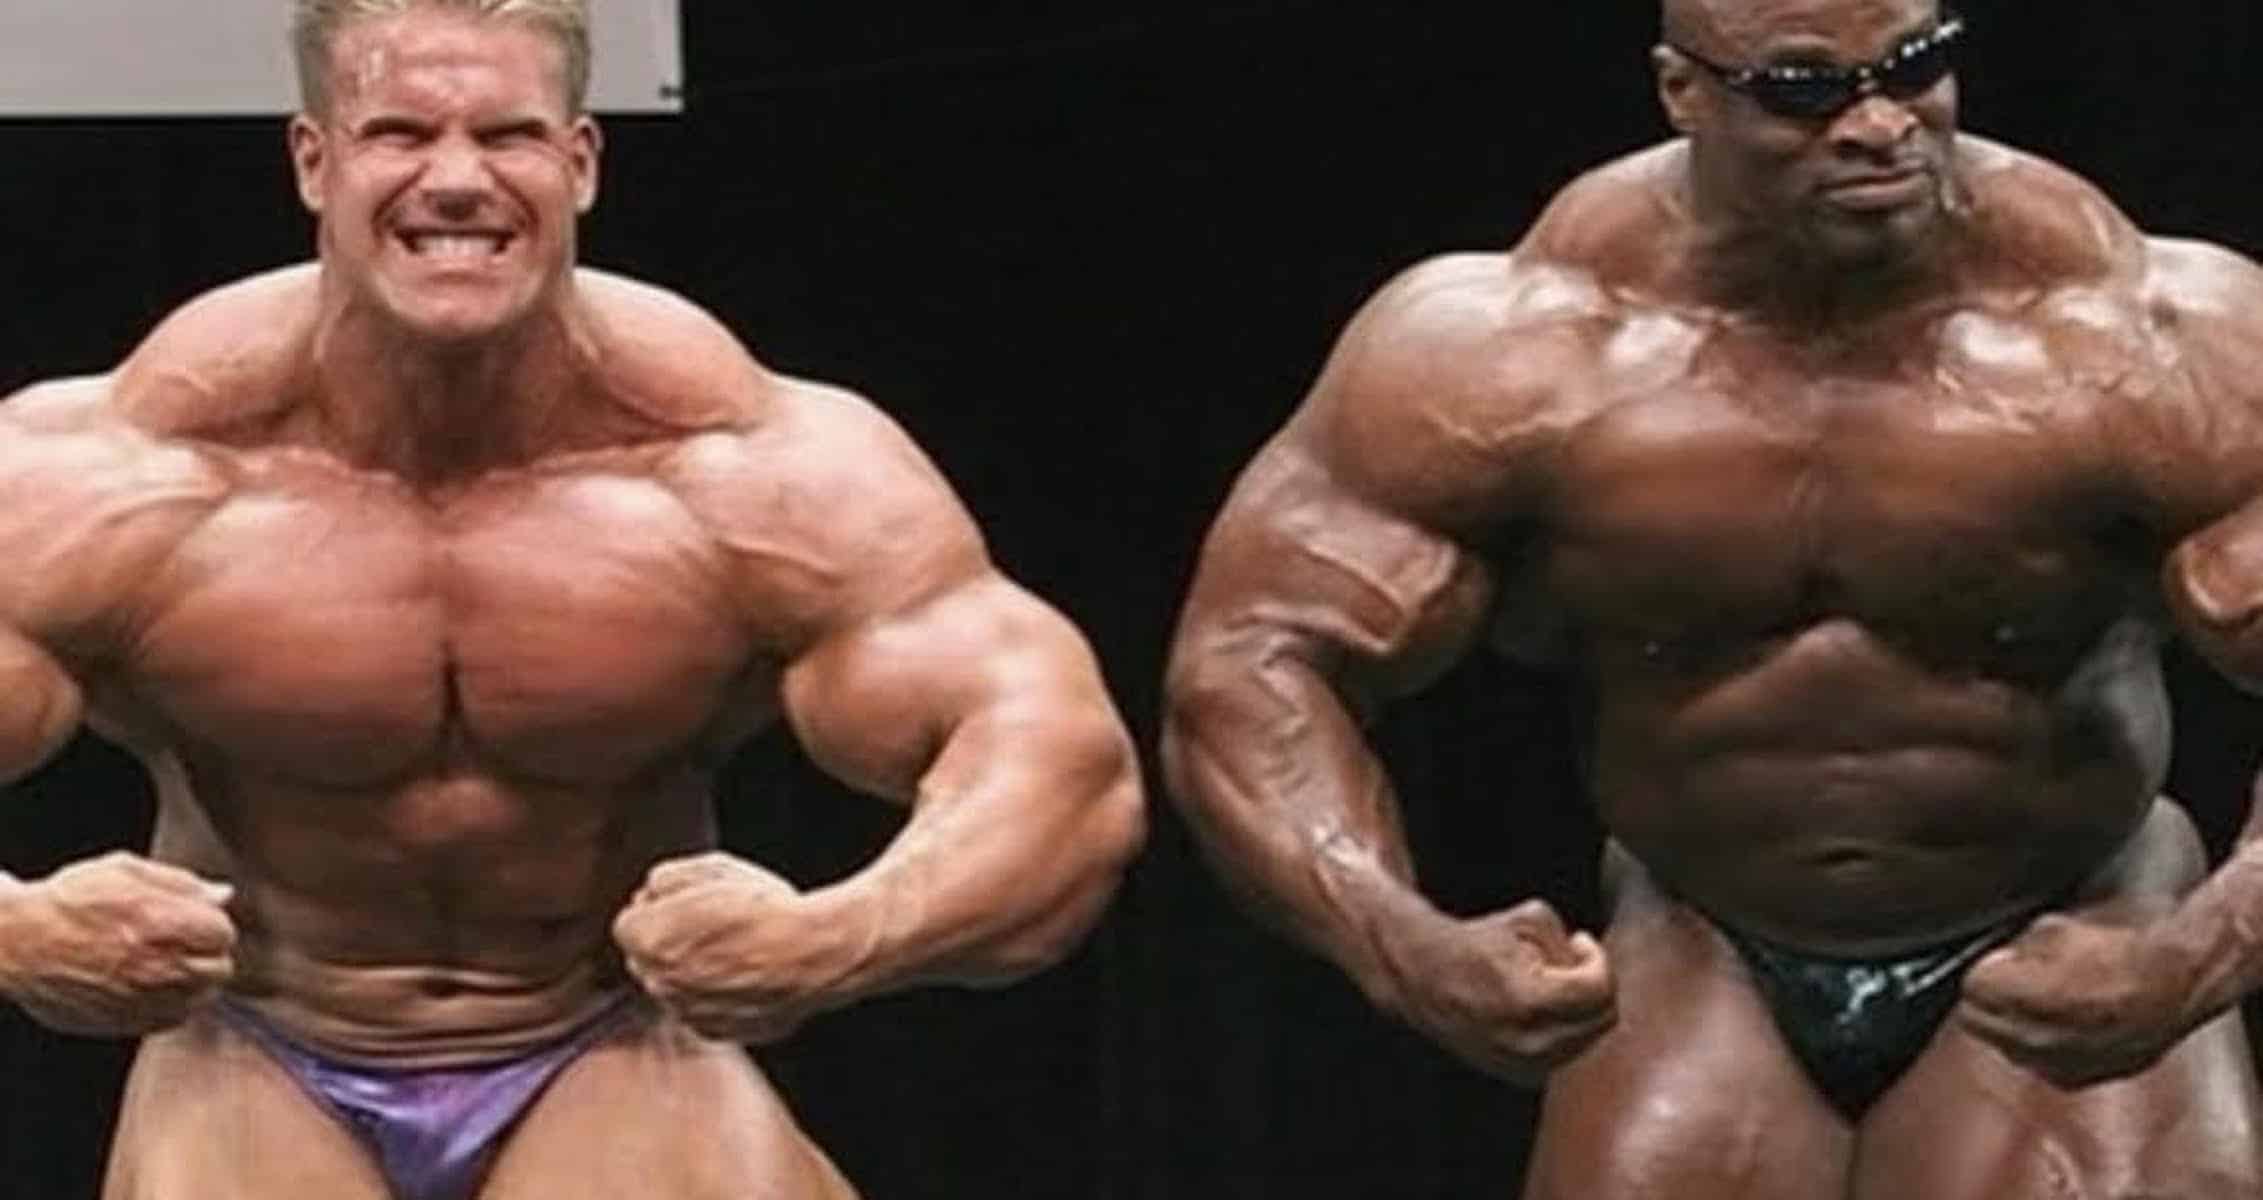 Ronnie Coleman Comments On Throwback Picture With Jay Cutler: 'We